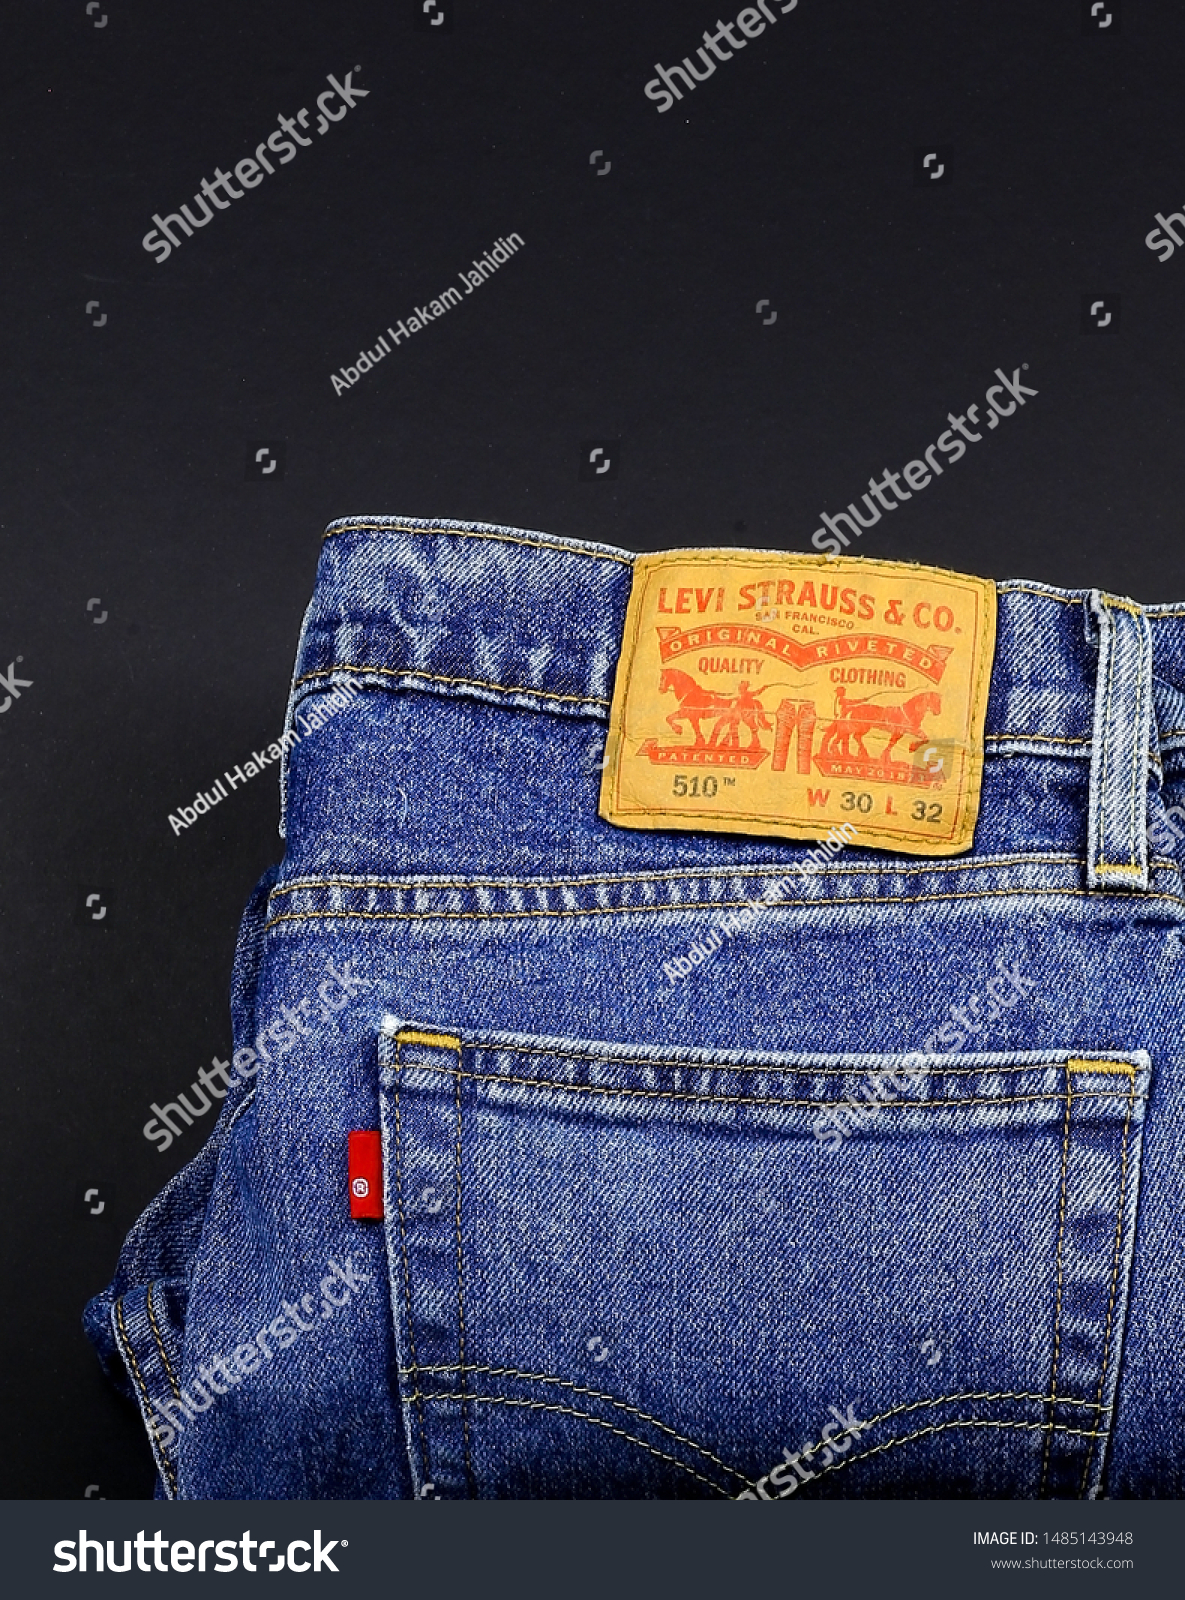 red tag levi jeans